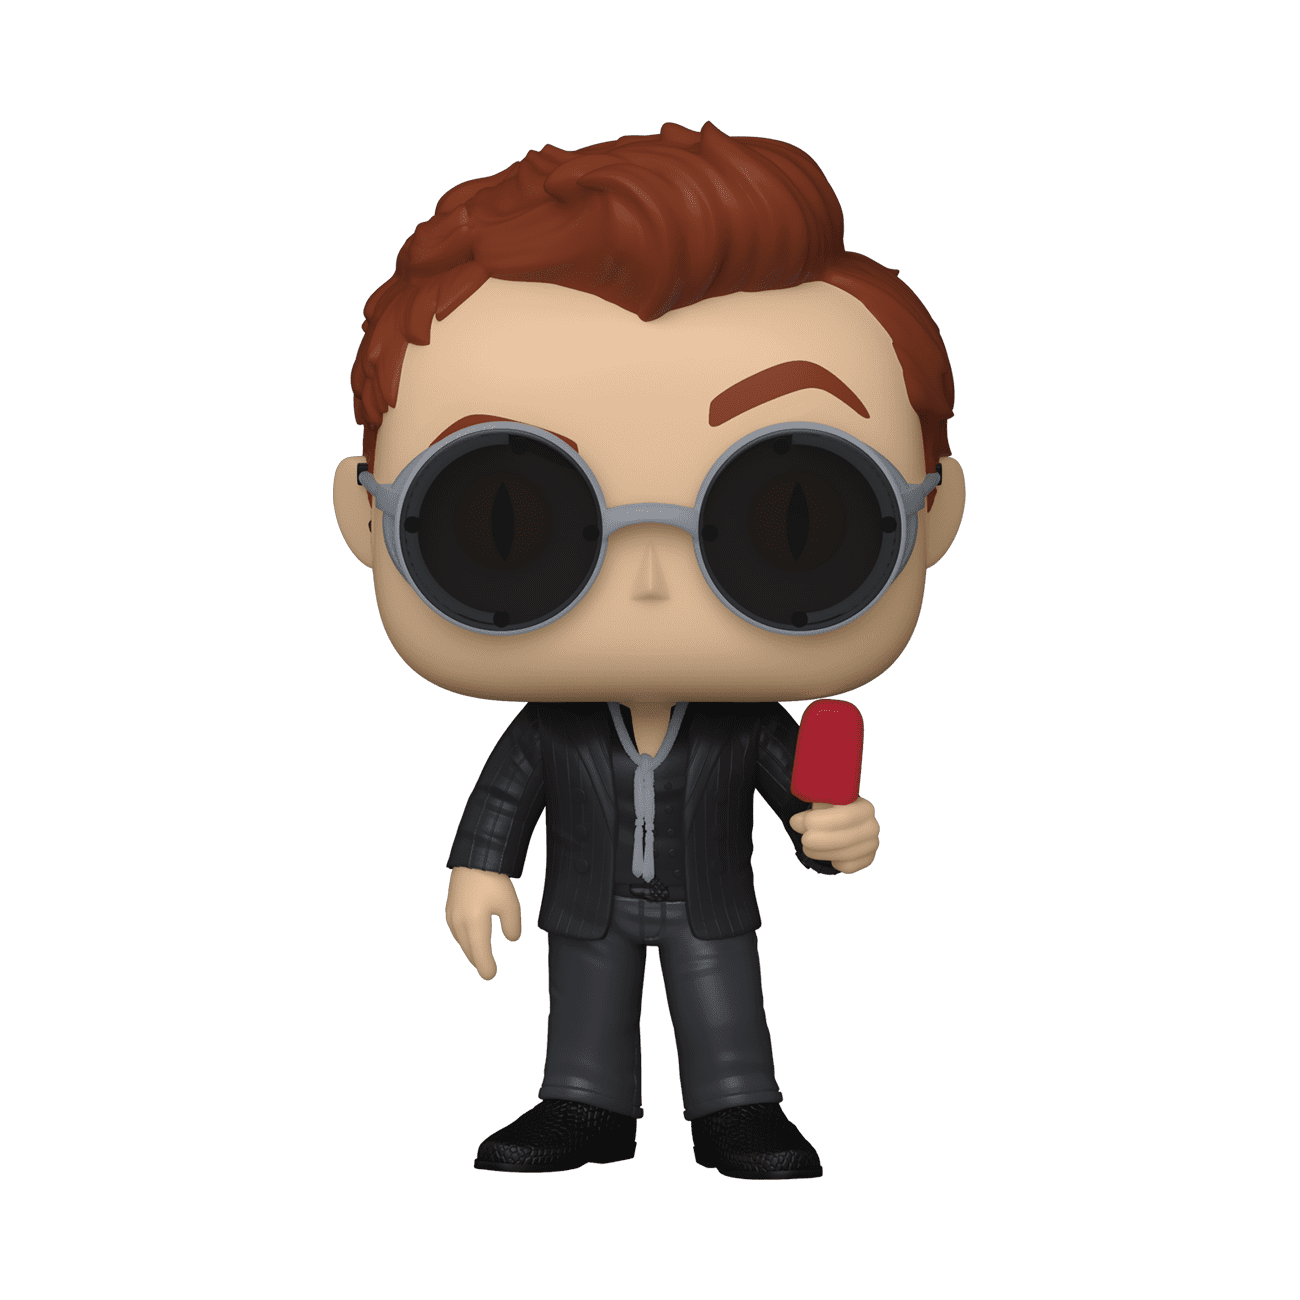 Funko POP! TV: Good Omens - Crowley with Apple with Chase